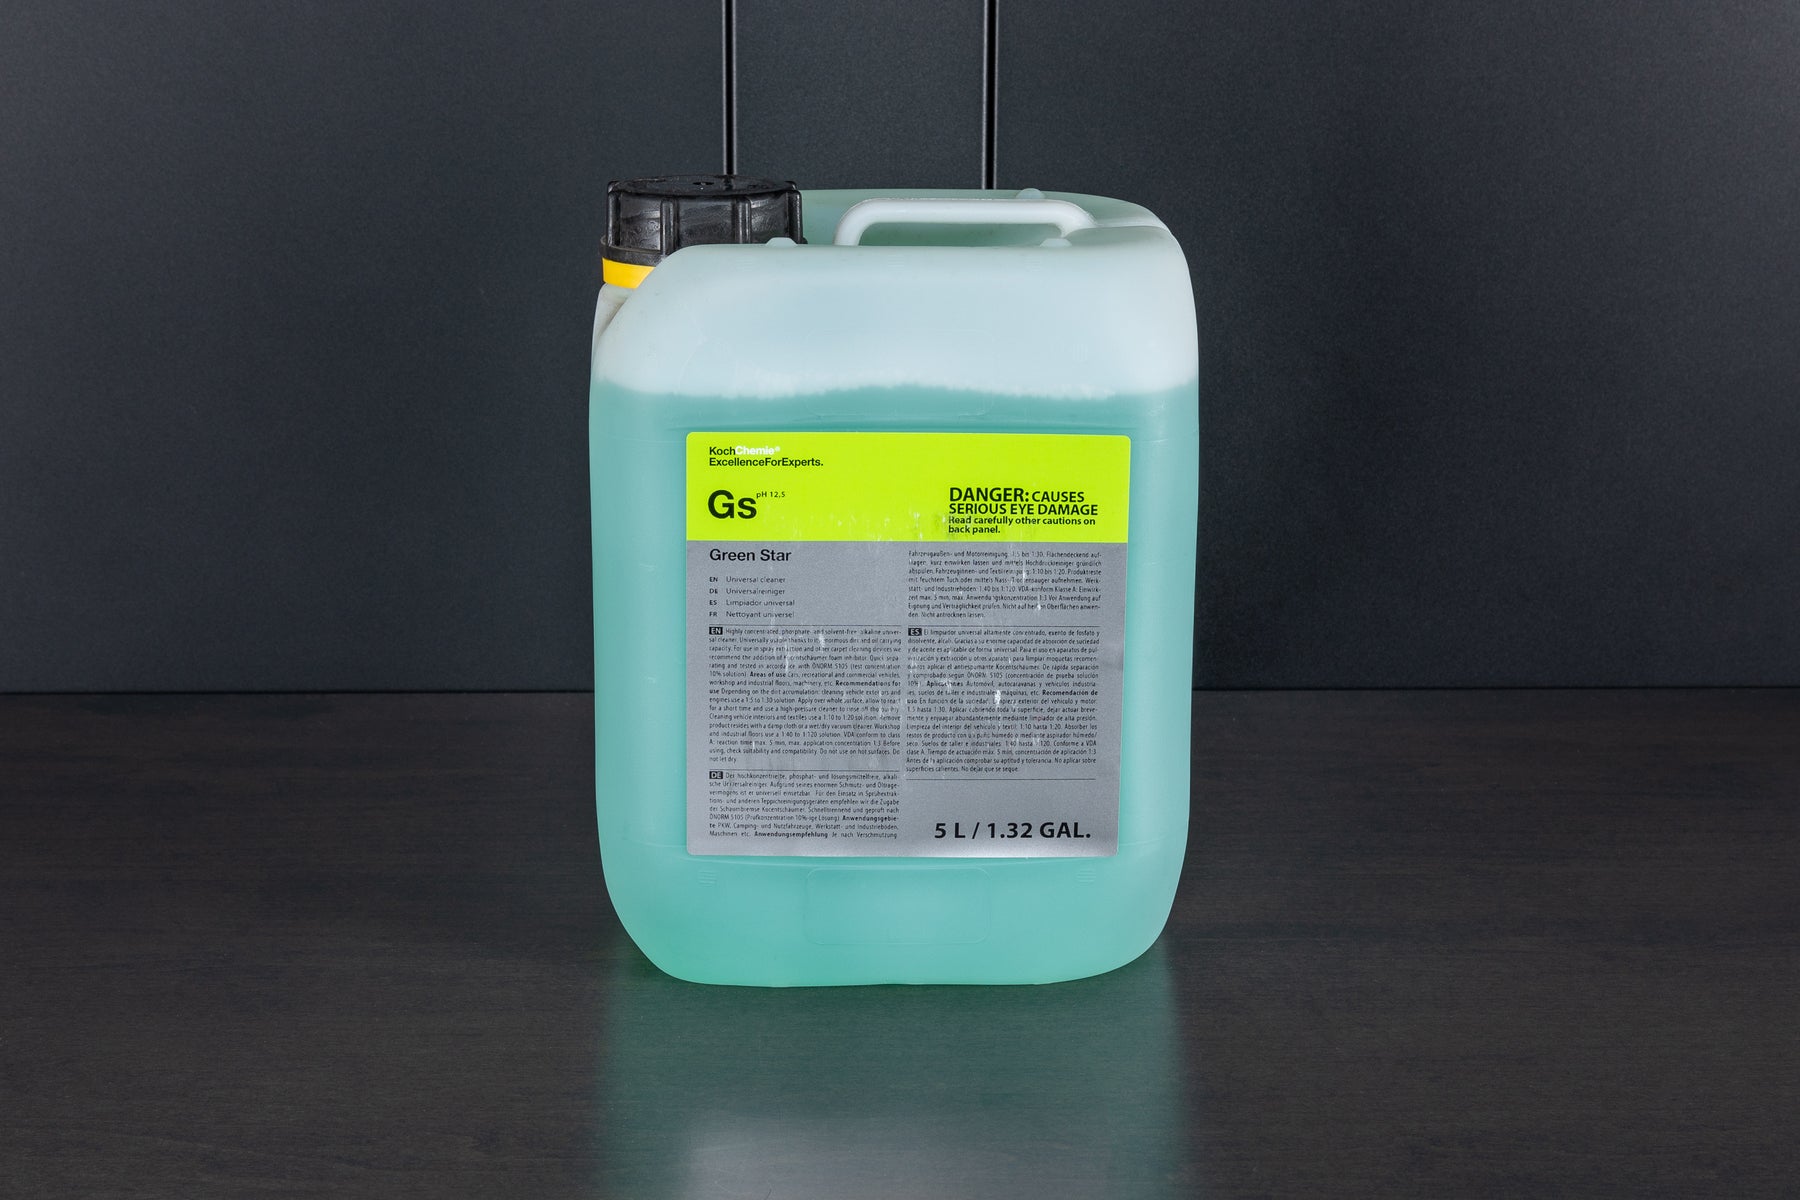 Koch Chemie (Vb) Highly Concentrated Pre-Cleaner 11kg – XPERT DETAILING